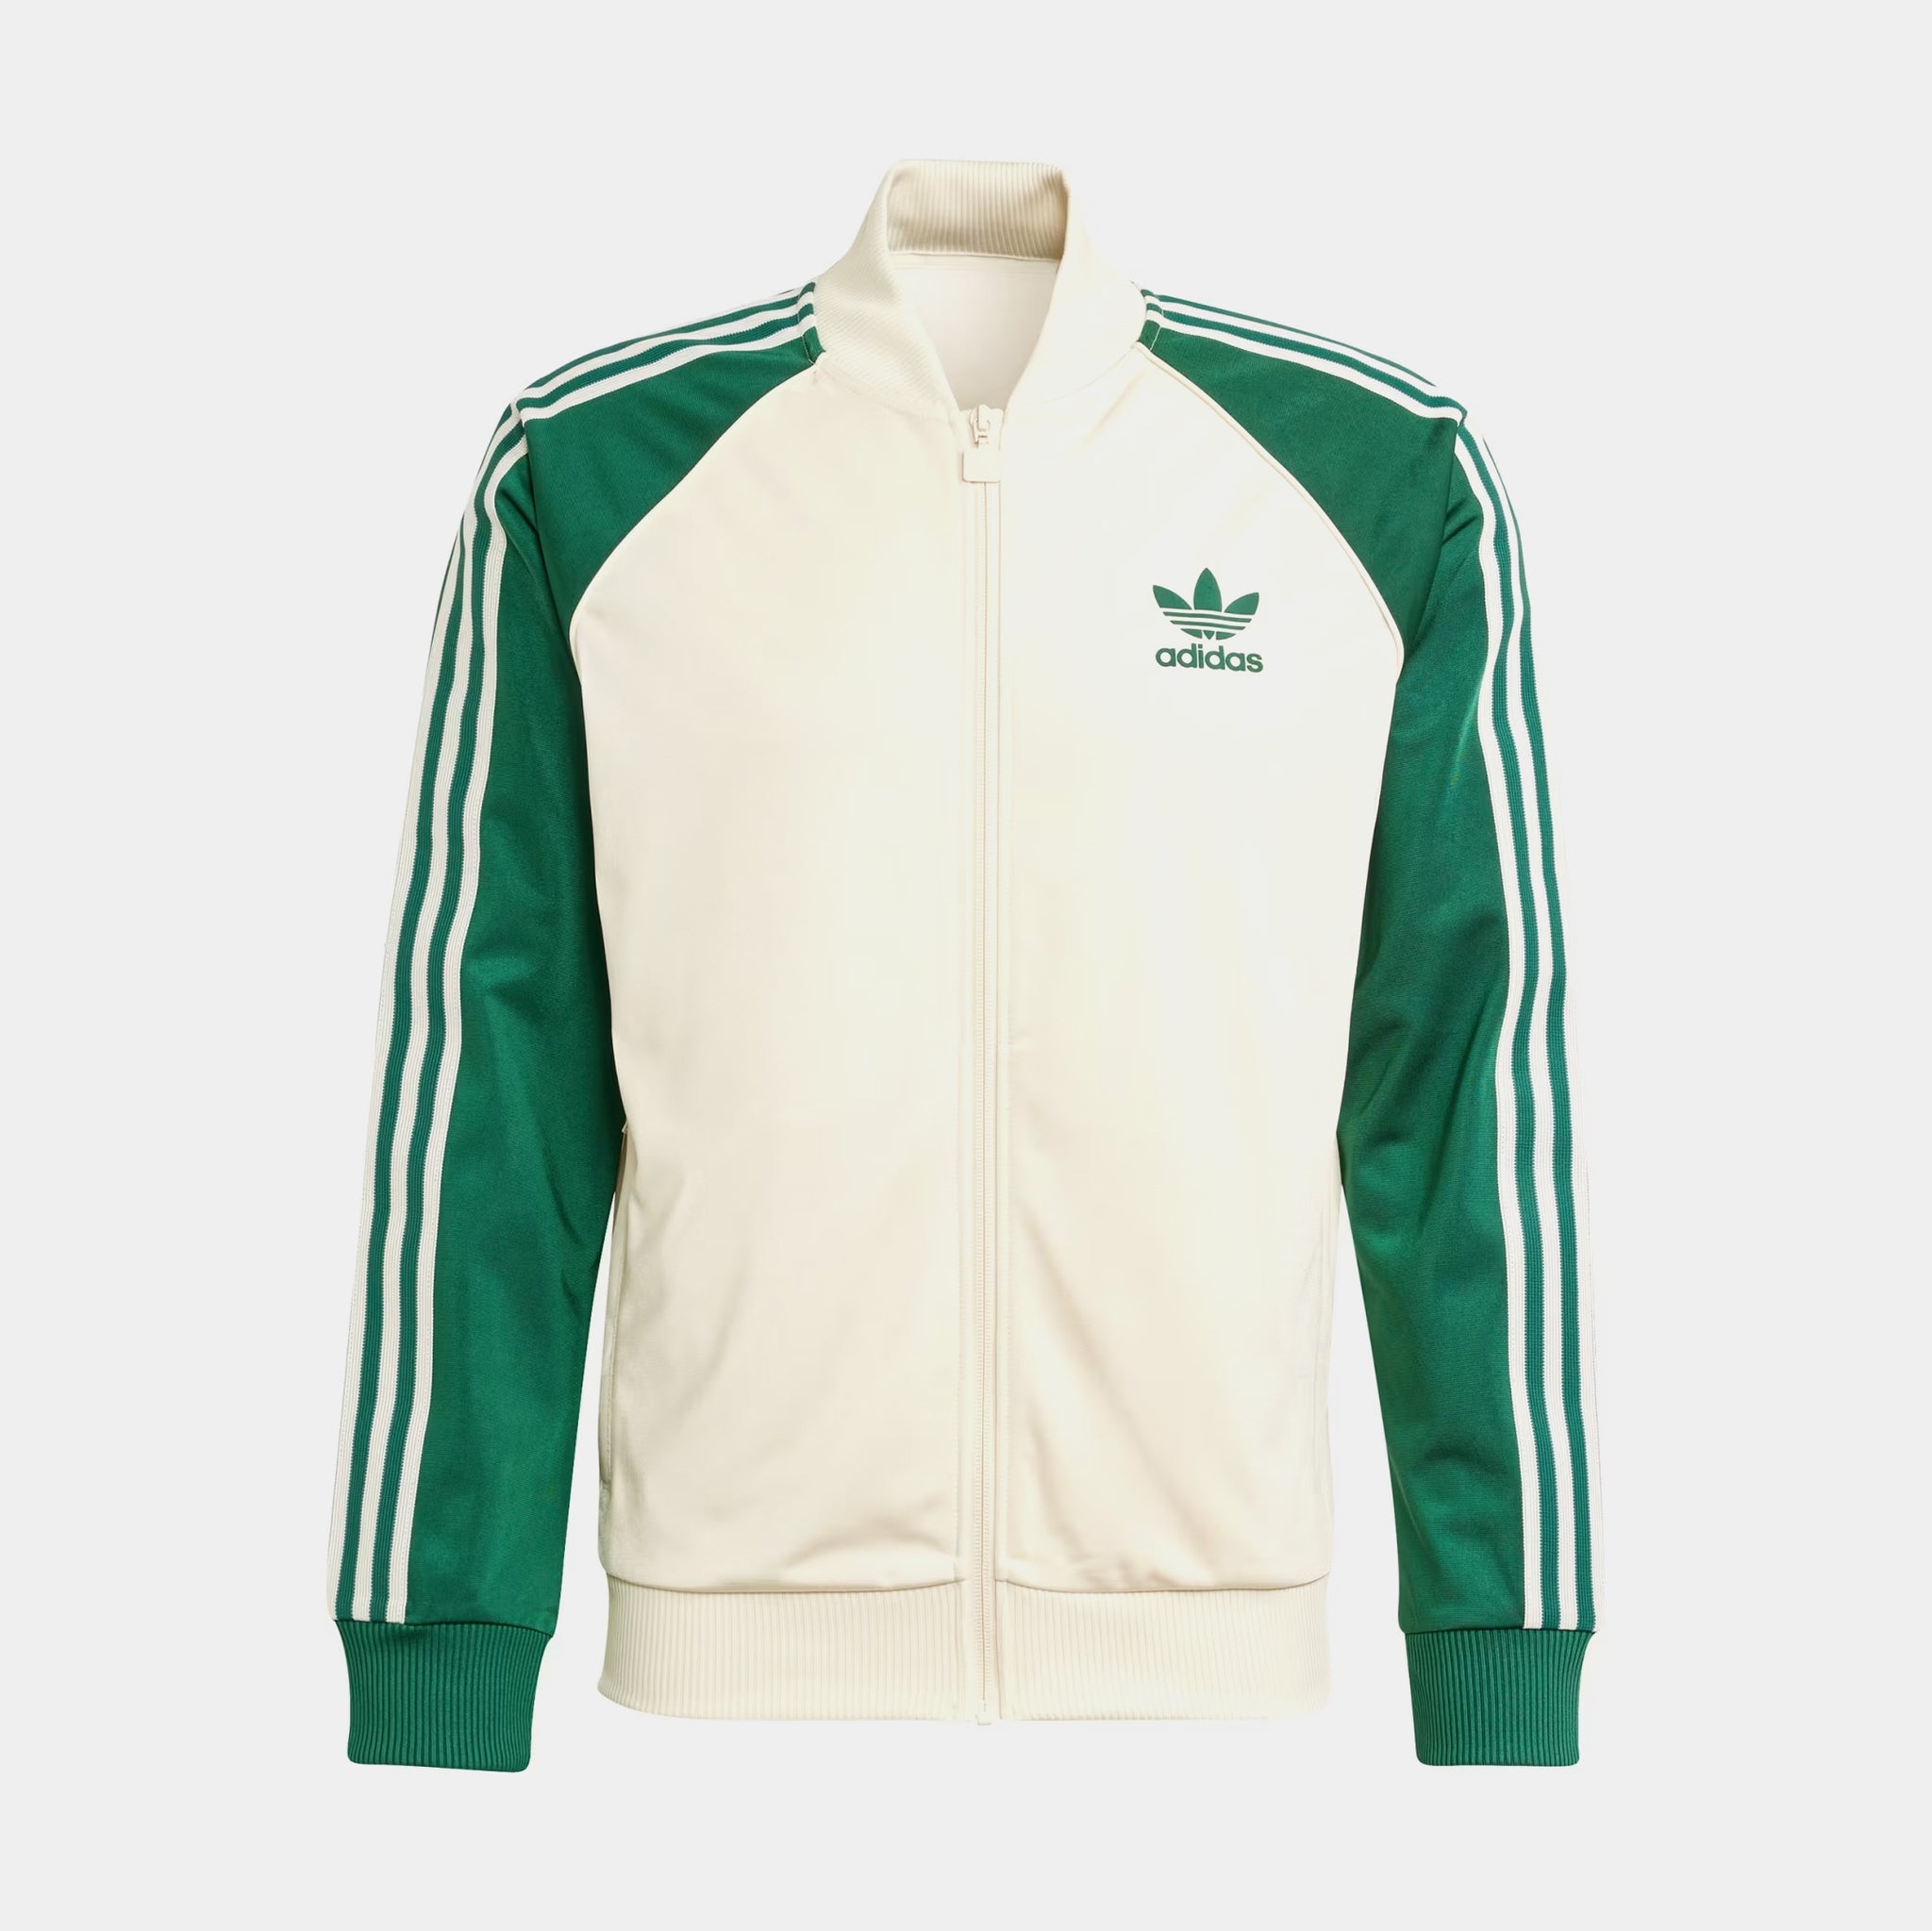 adidas Mens Big and Tall Midweight Track Jacket - JCPenney